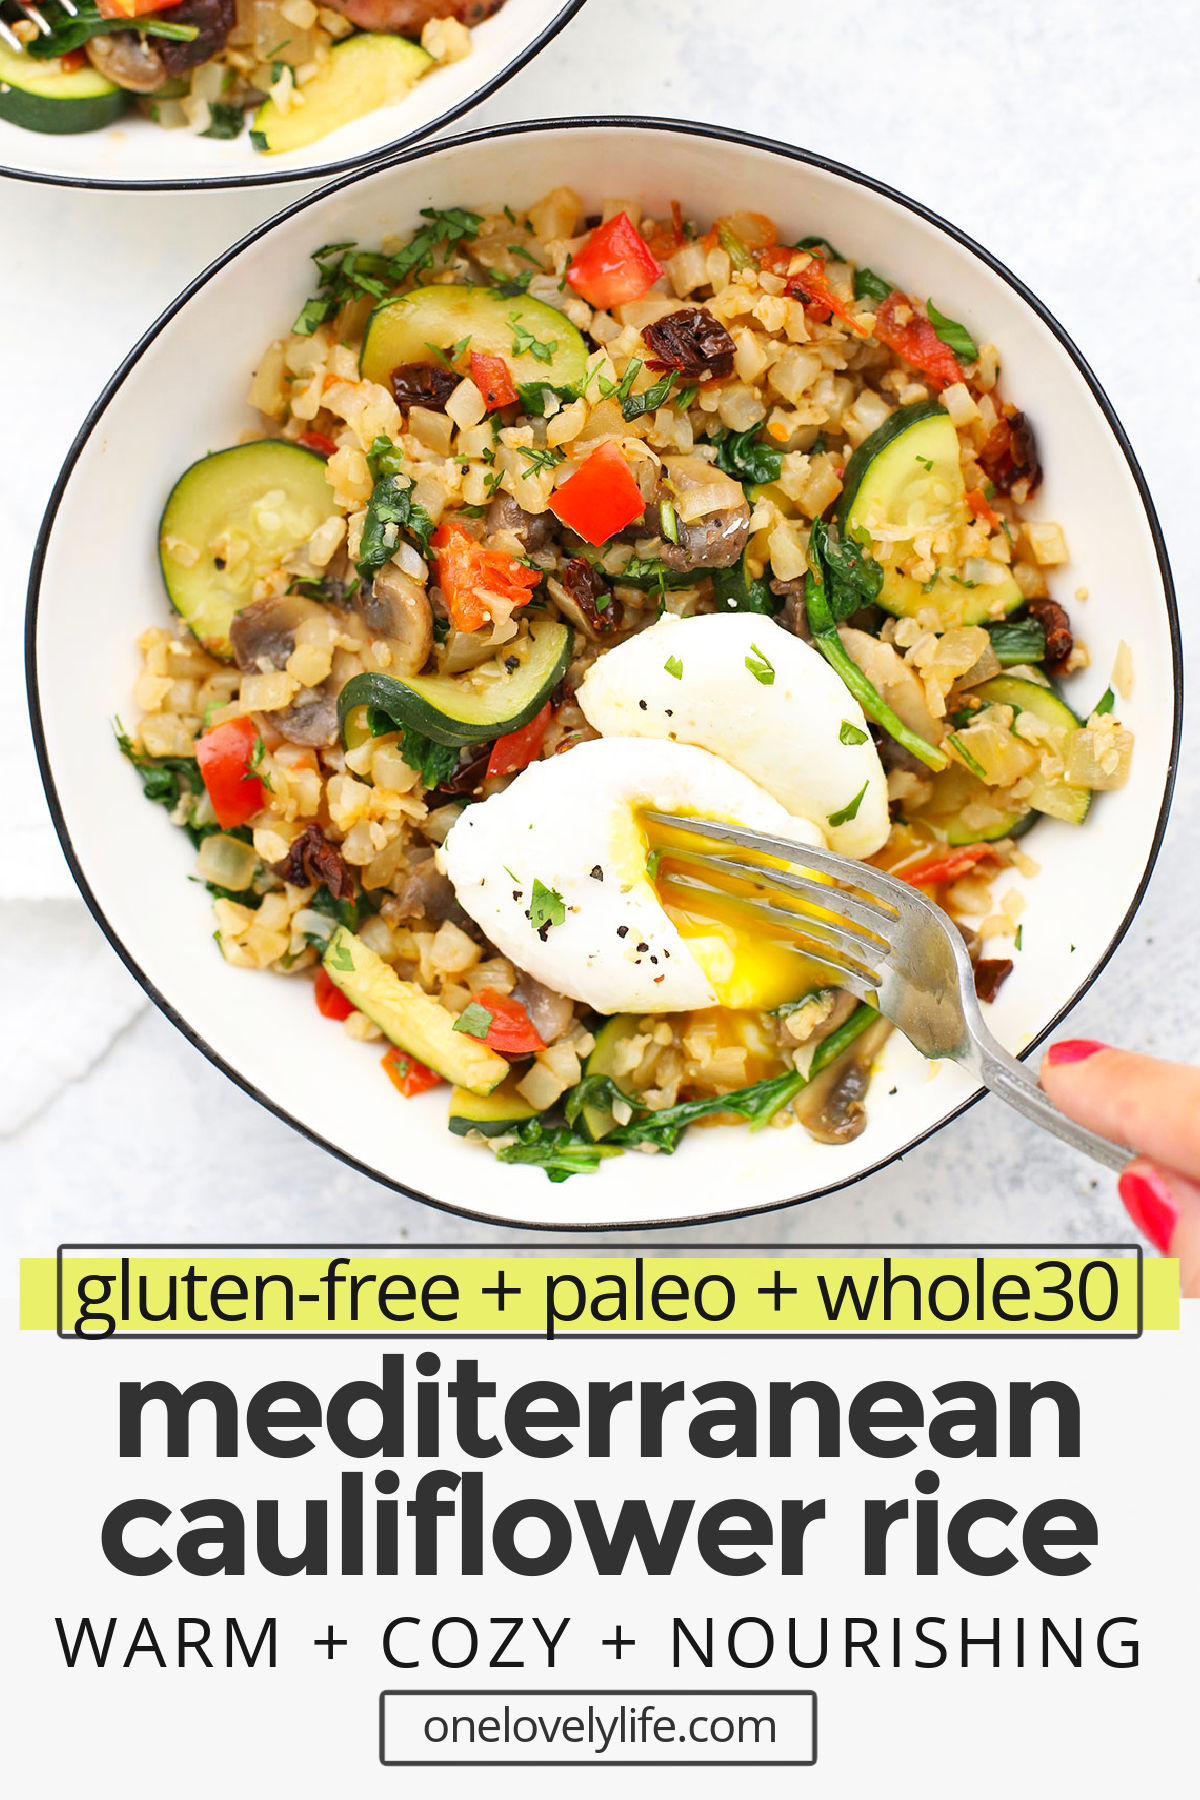 Mediterranean Cauliflower Rice Skillet - This easy cauliflower rice recipe tastes amazing and works for any meal of the day. Don't miss my meal prep tips + serving ideas! // cauli rice // cauliflower rice with mushrooms // mediterranean cauliflower rice // cauliflower rice pilaf // breakfast cauliflower rice // paleo breakfast // paleo meal prep // whole30 breakfast // whole30 meal prep // gluten free // dairy free